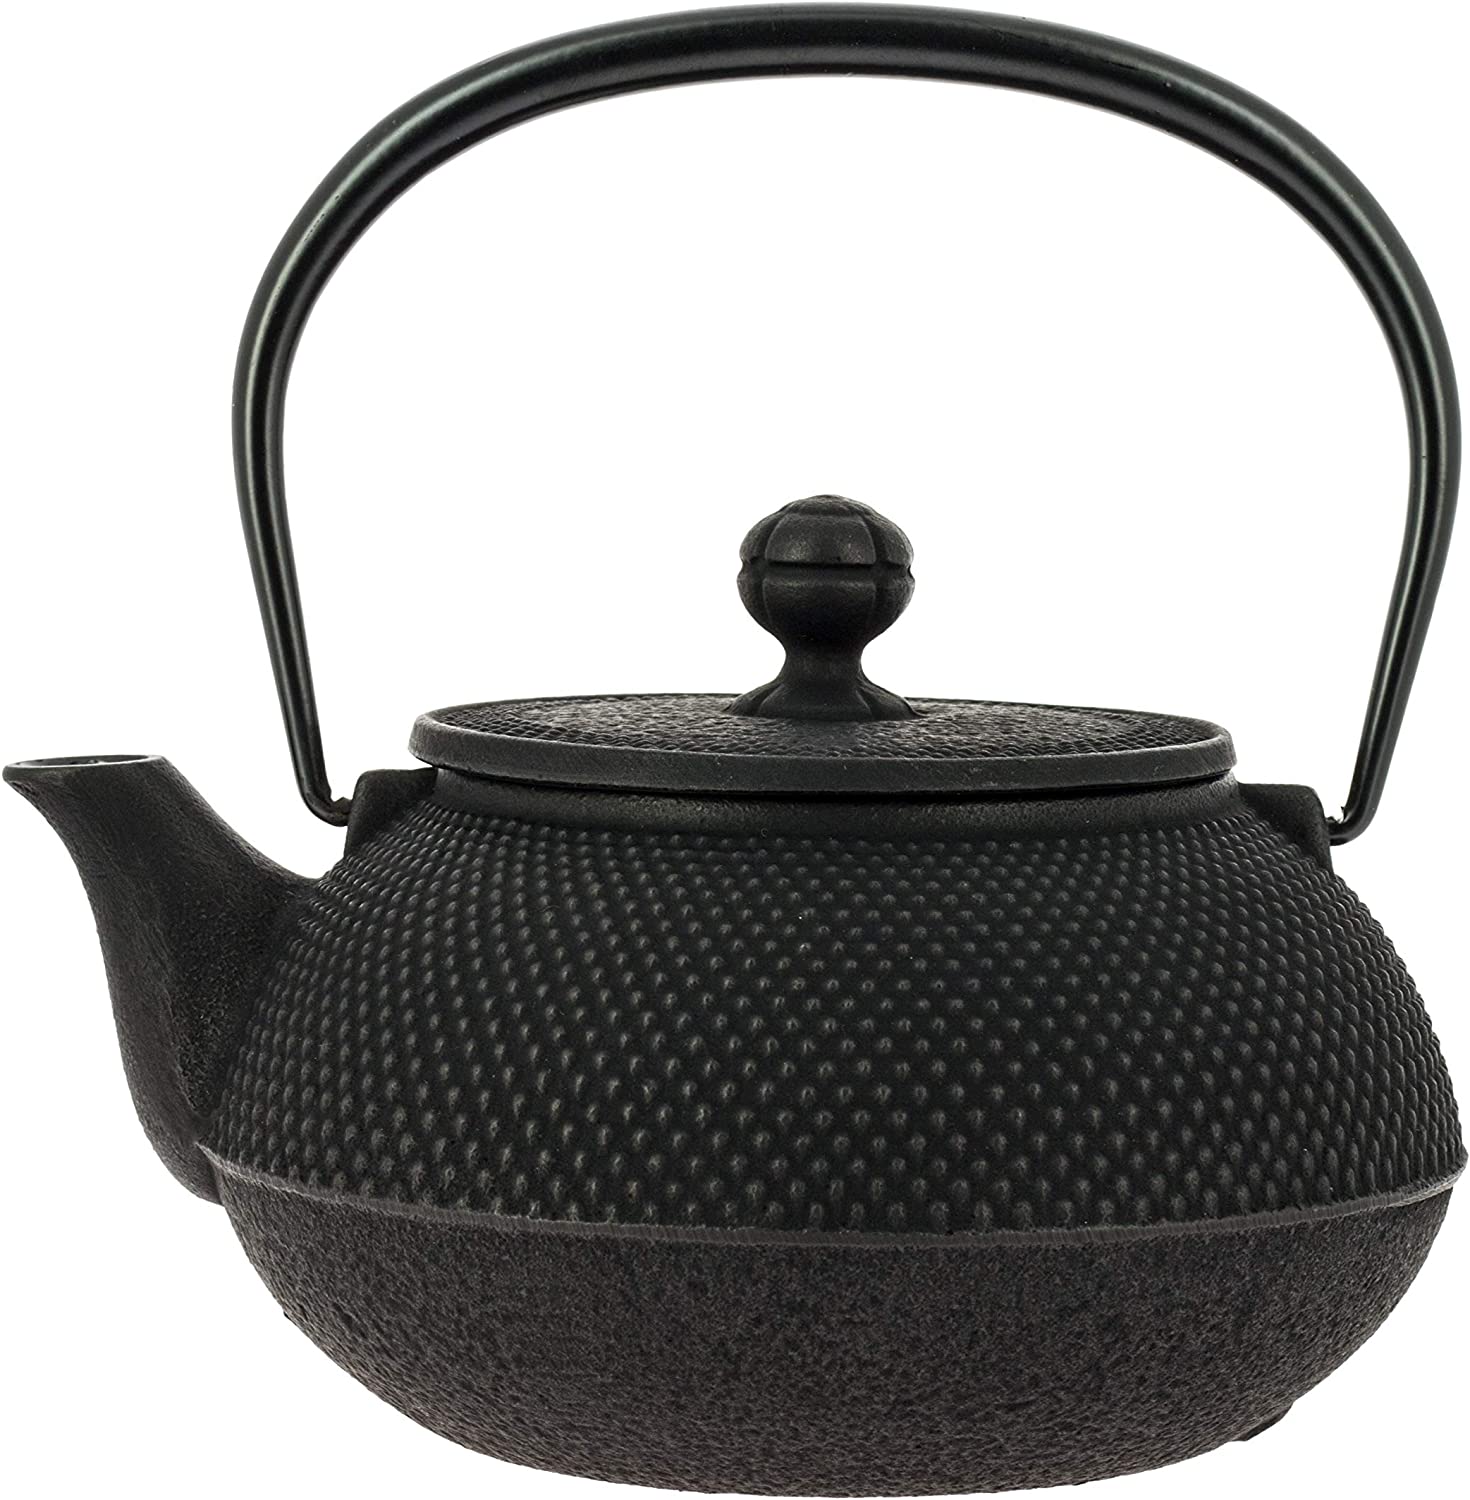 Iwachu Japanese Cast Iron Teapot with Filter and Traditional Design 900ml Black